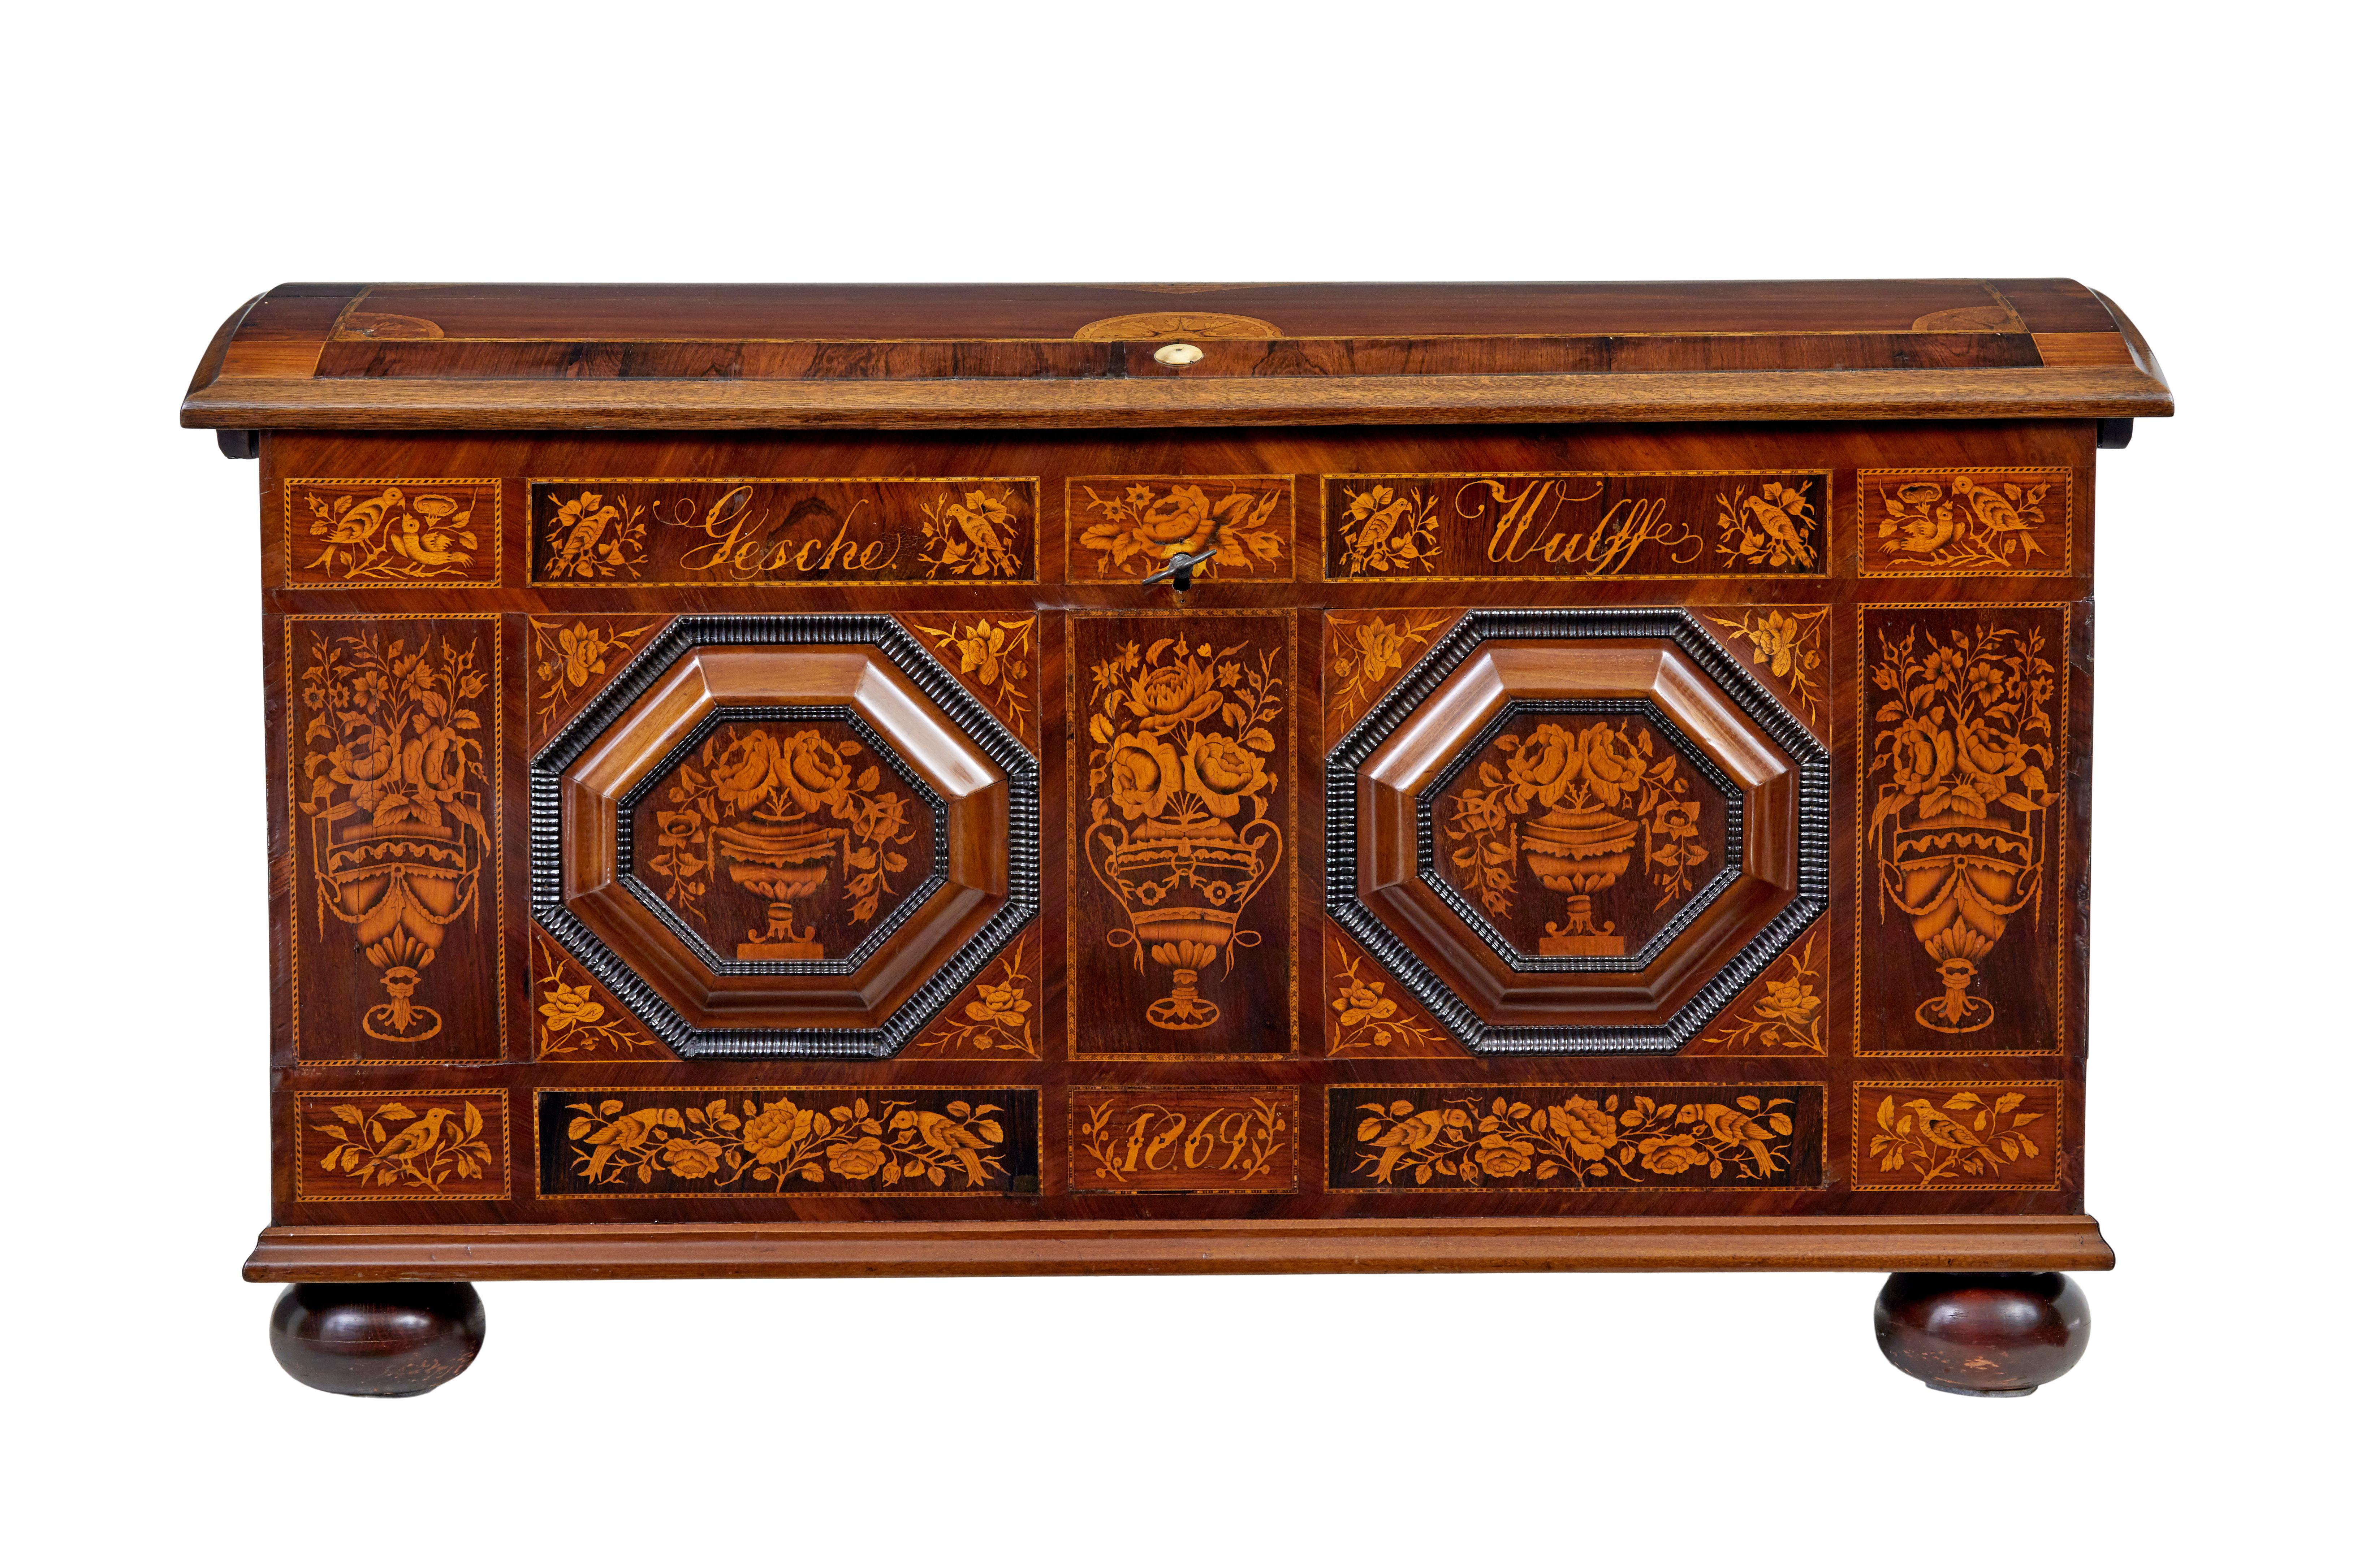 Beautiful inlaid dome top chest of the finest quality circa 1869.

Inscribed on the front with the name 'gesche wulff' and dated 1869.  Superbly inlaid in satinwood with urns, florals and birds.  2 octagonal raised plaques applied to the front,